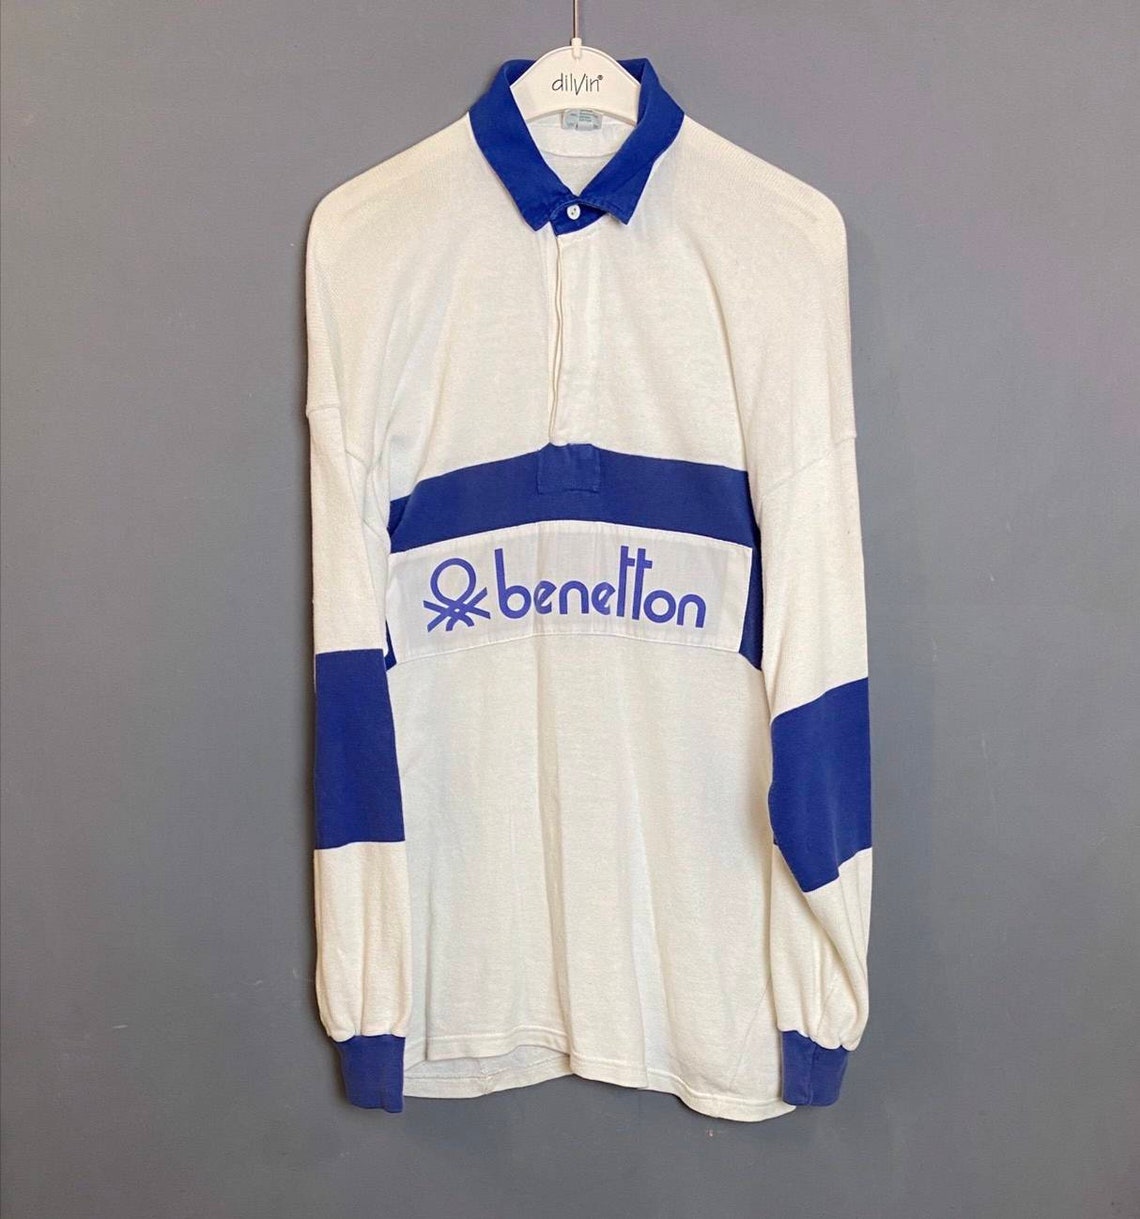 Rare Vintage rugby jersey Benetton 1980's | Etsy